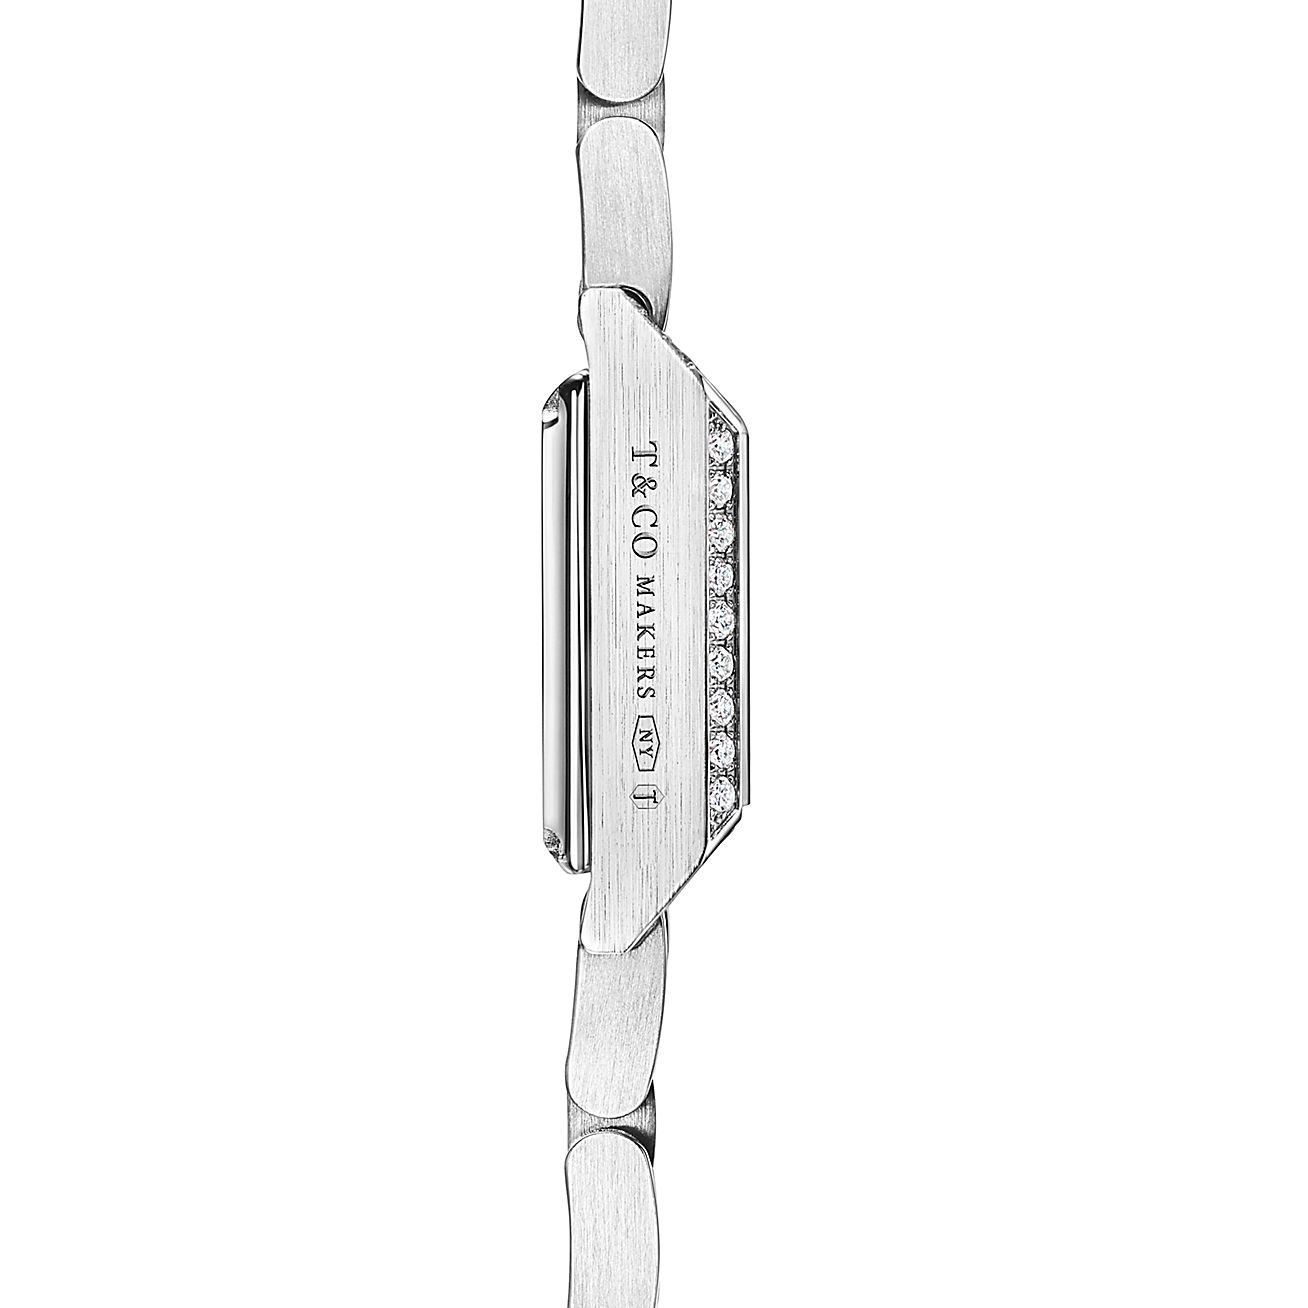 Tiffany 1837 Makers 16 mm Square Watch in Stainless Steel with a